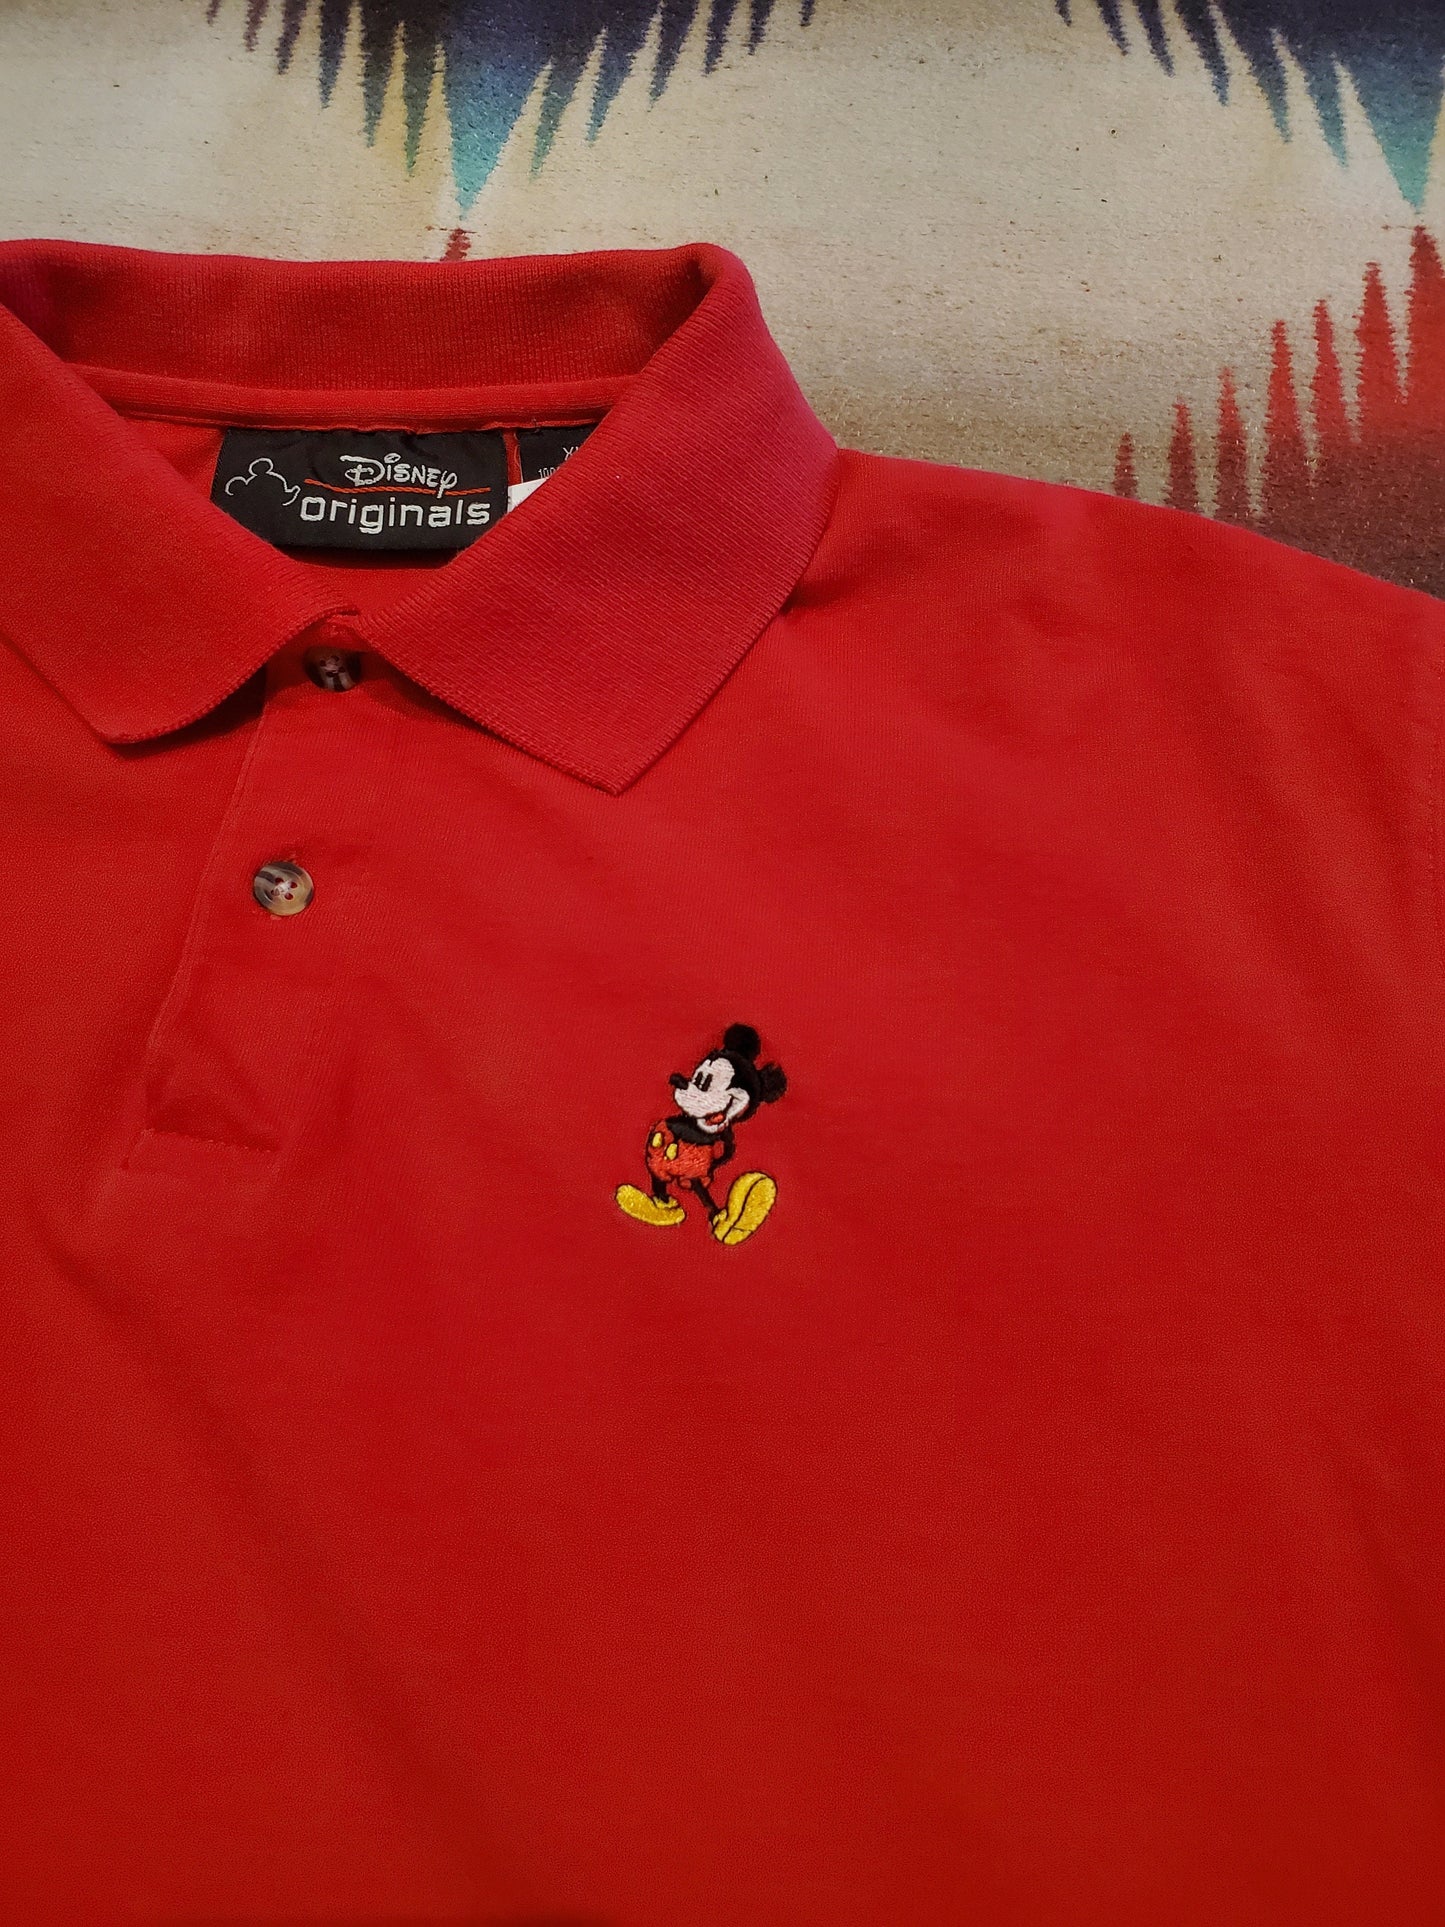 1990s/2000s Disney Originals Mickey Mouse Polo Shirt Size L